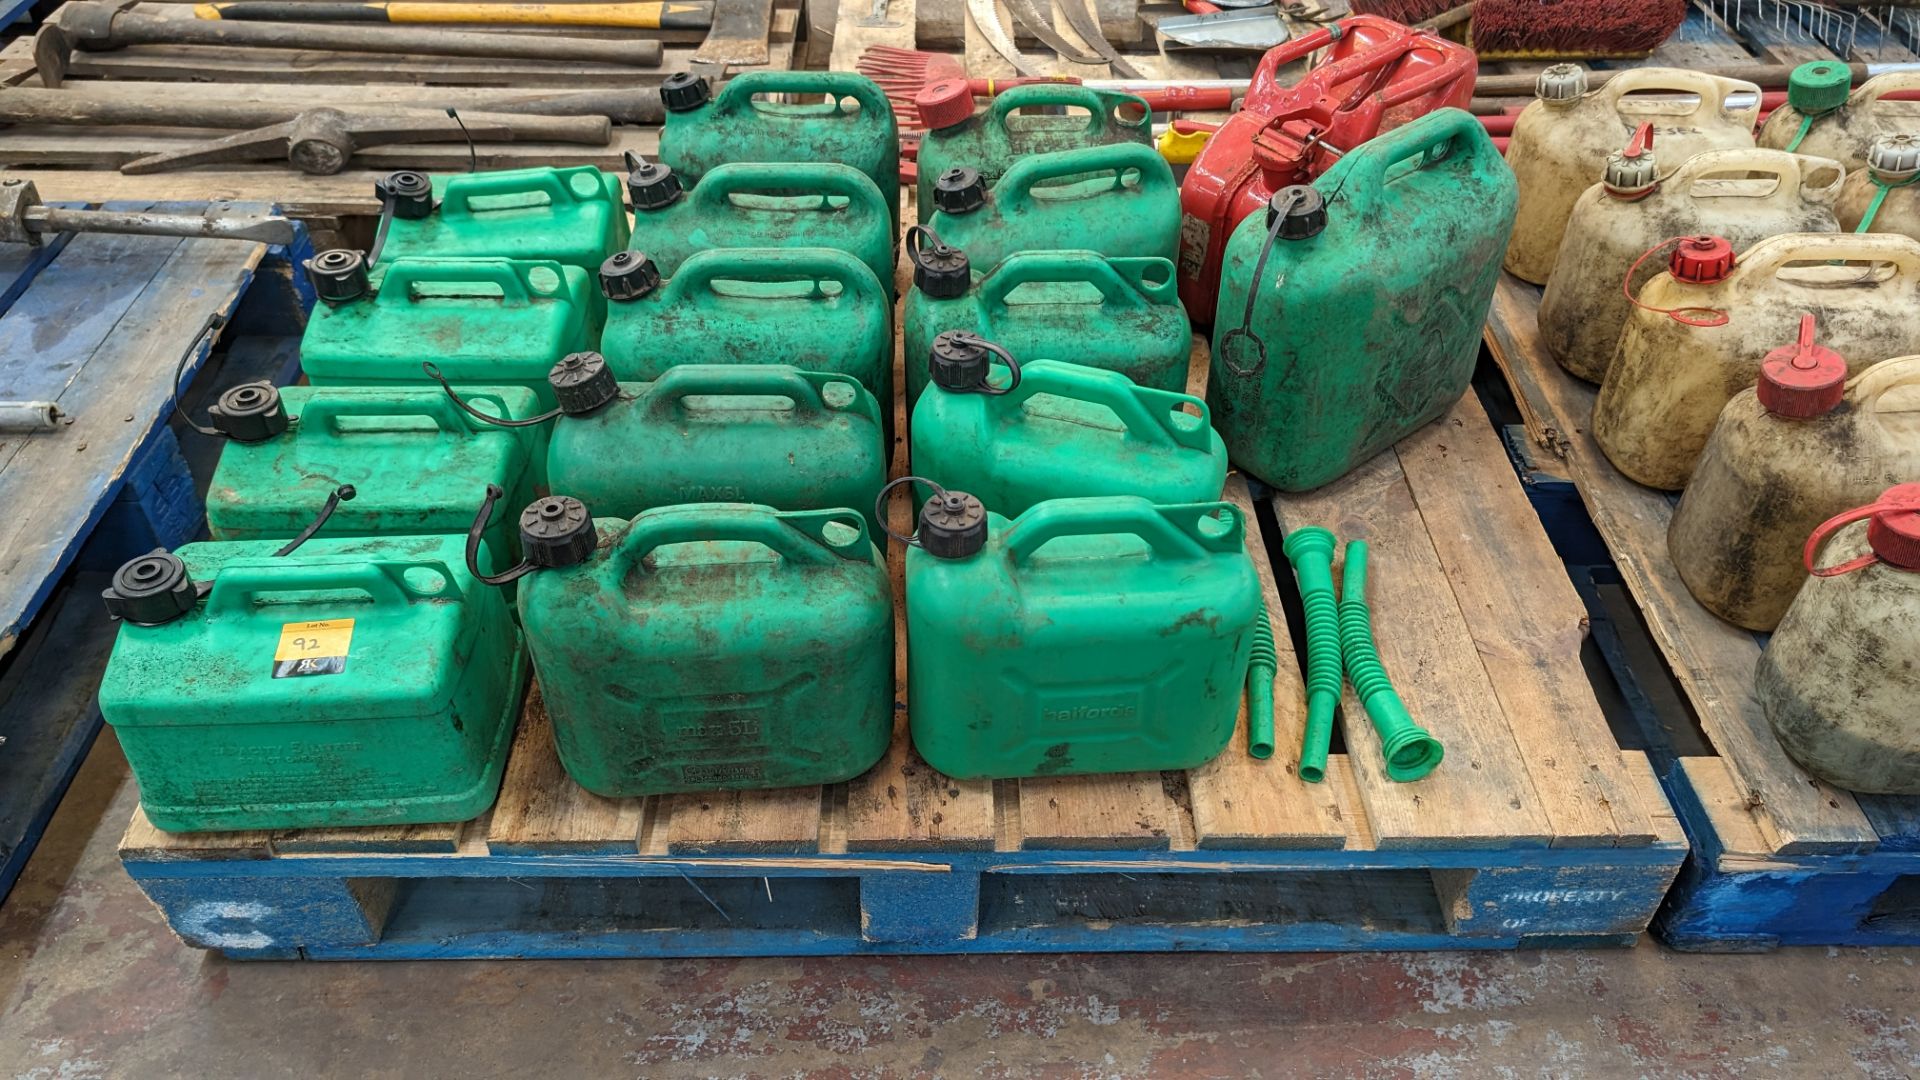 The contents of a pallet of plastic fuel cans - Image 3 of 7